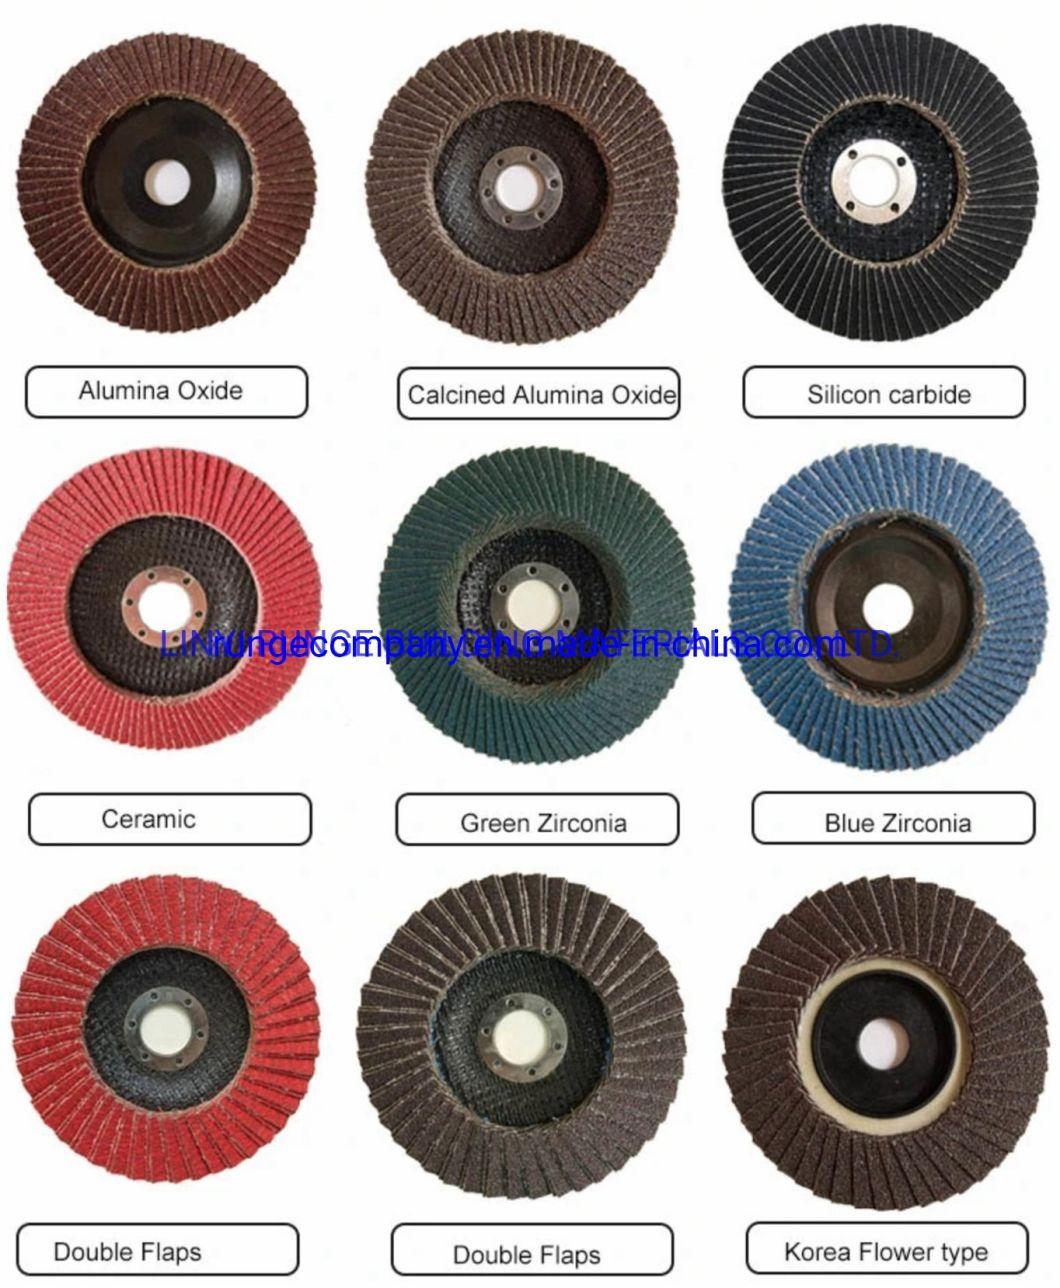 Abrasives General Purpose/Long Life Grinding Wheel (Type 27/Depressed Center) Welding Grinding Disc 4 1/2" X 1/4" X 7/8" for Angle Grinding Power Tools